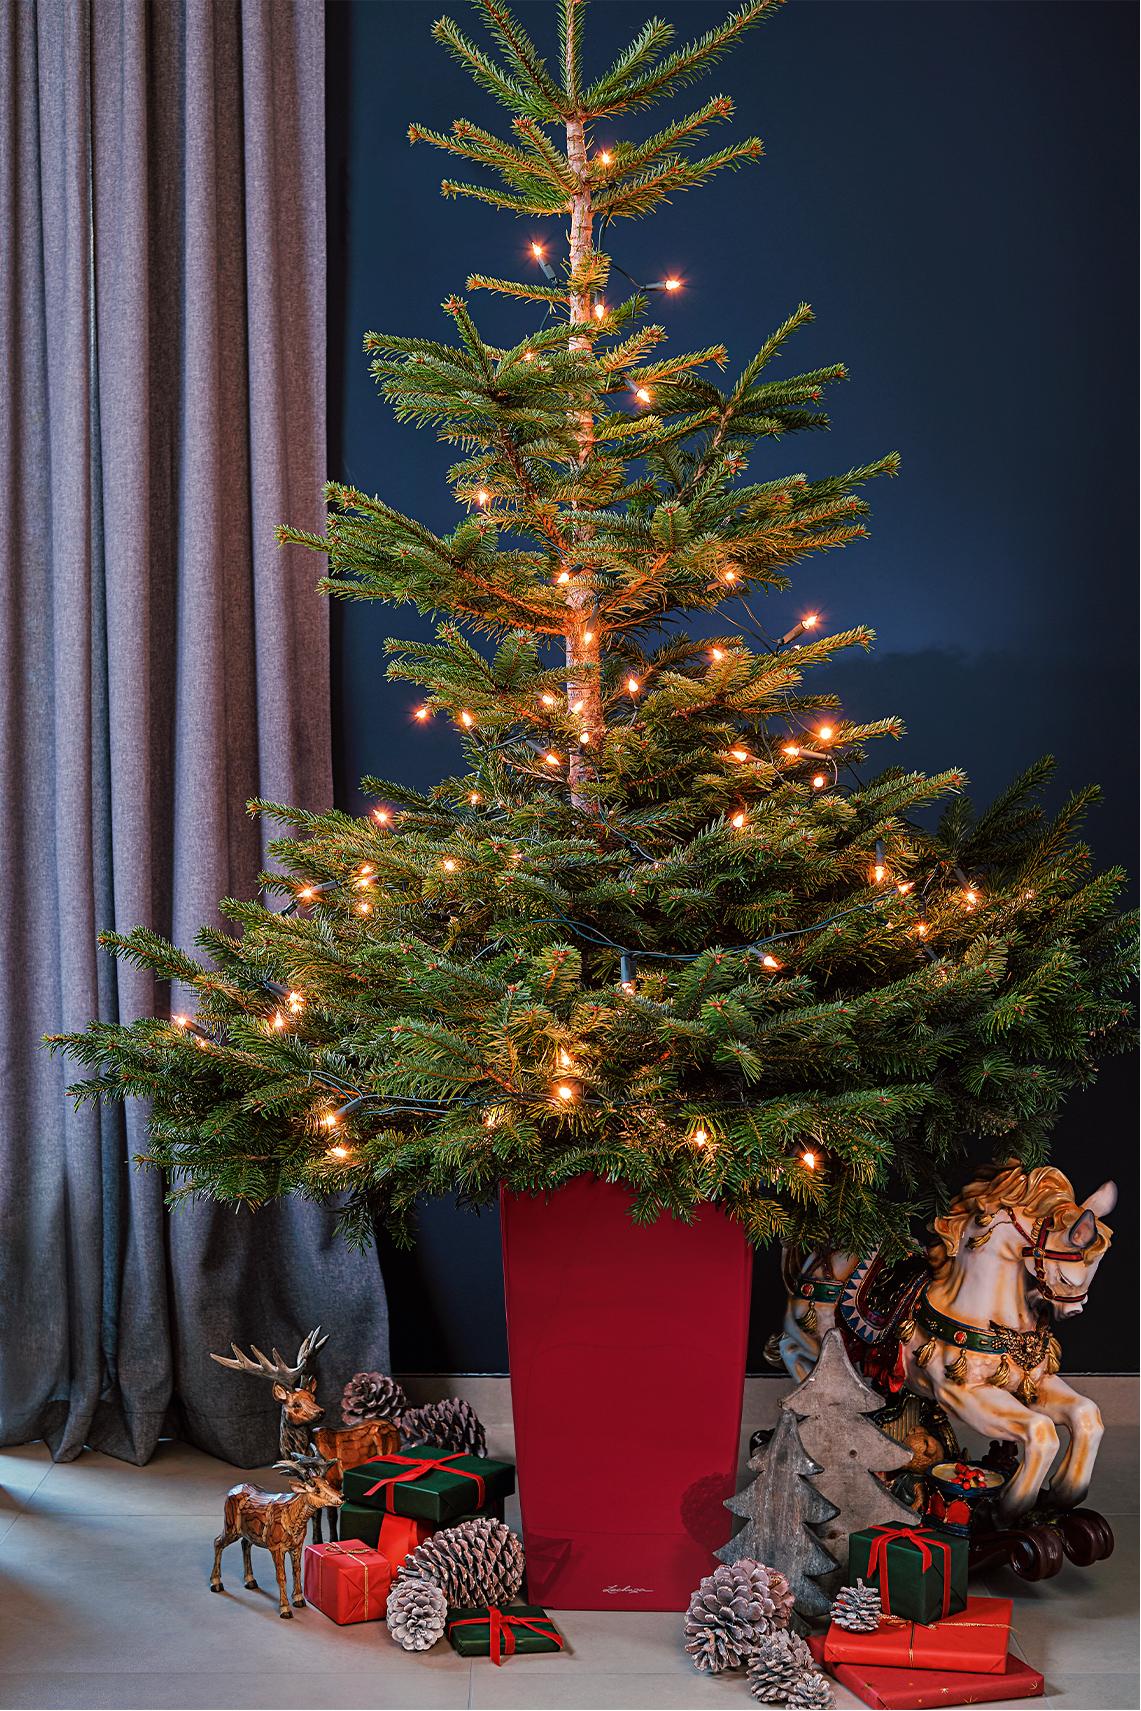 CUBICO Premium scarlet red planted with a festively decorated Christmas tree